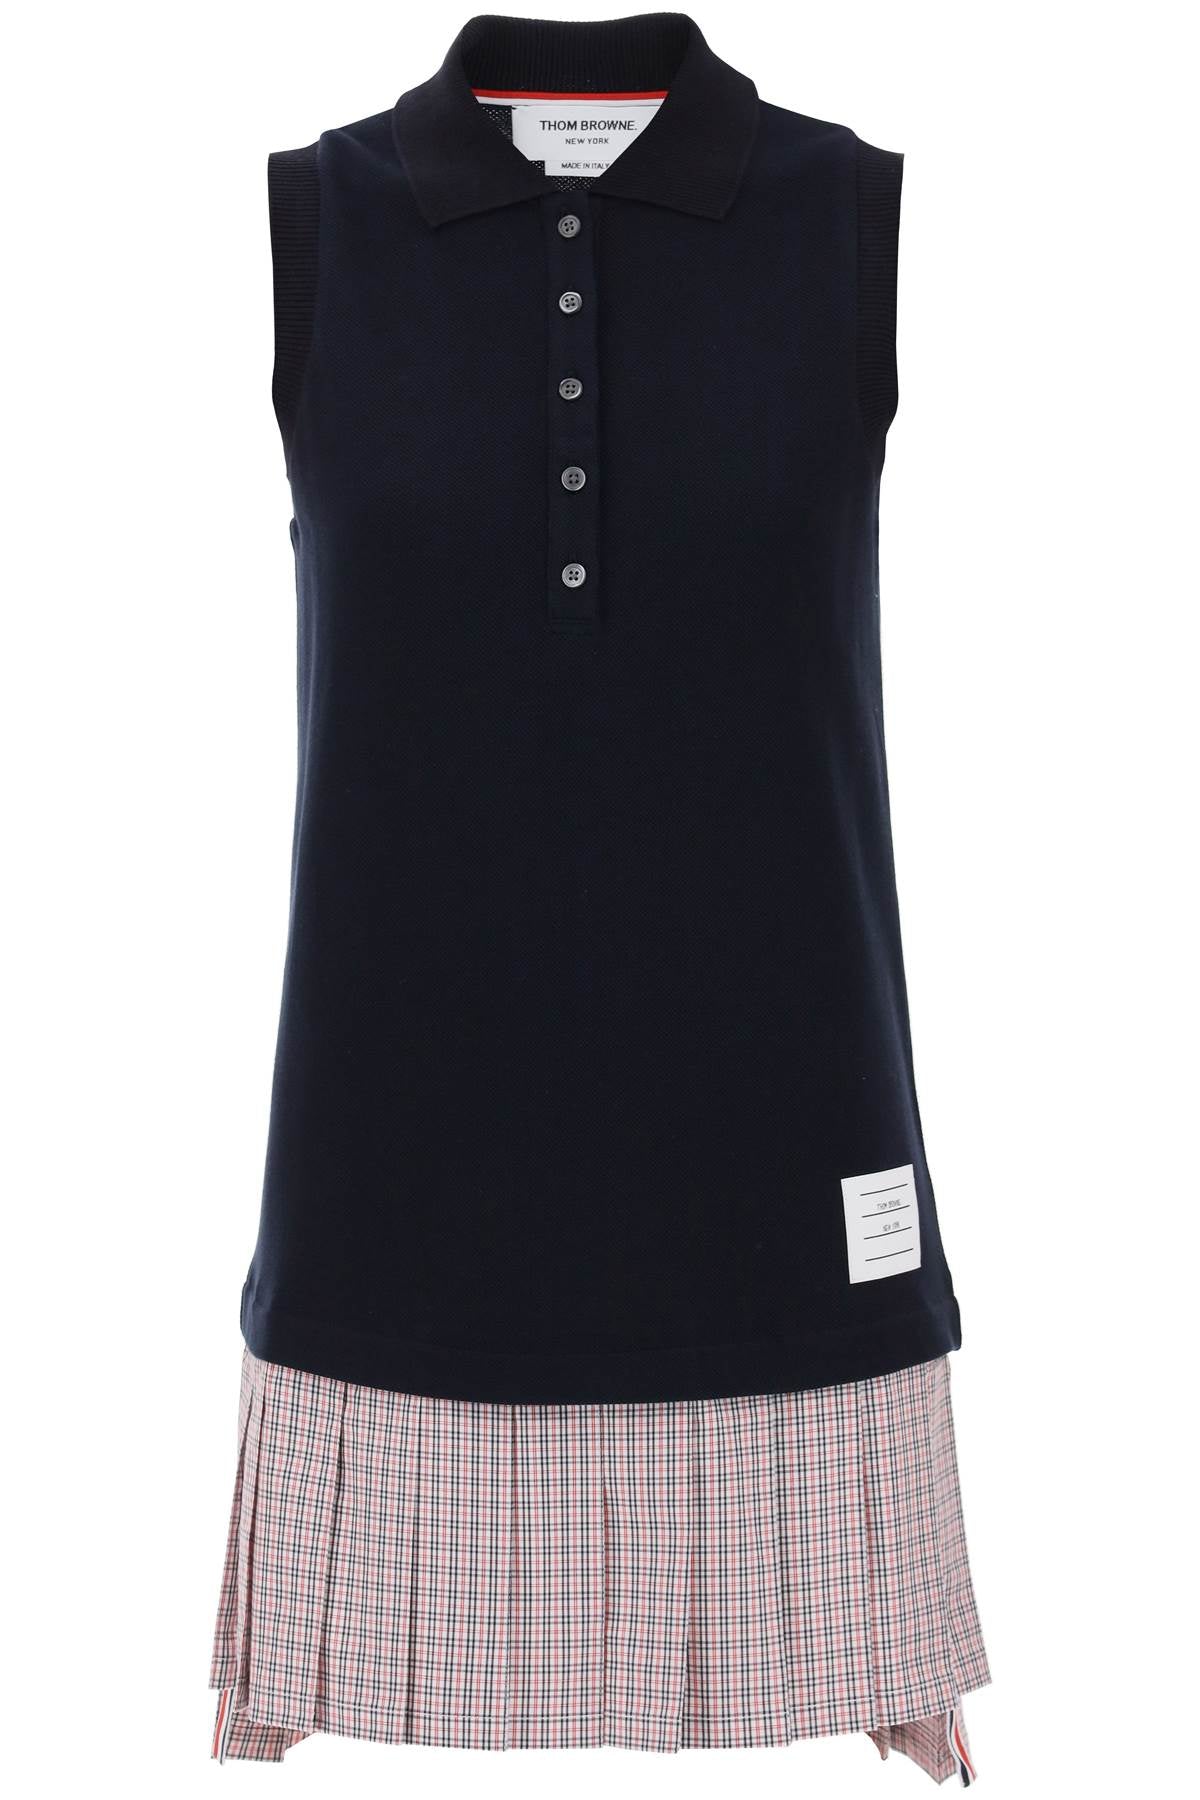 Thom browne mini polo-style dress with pleated bottom.-0